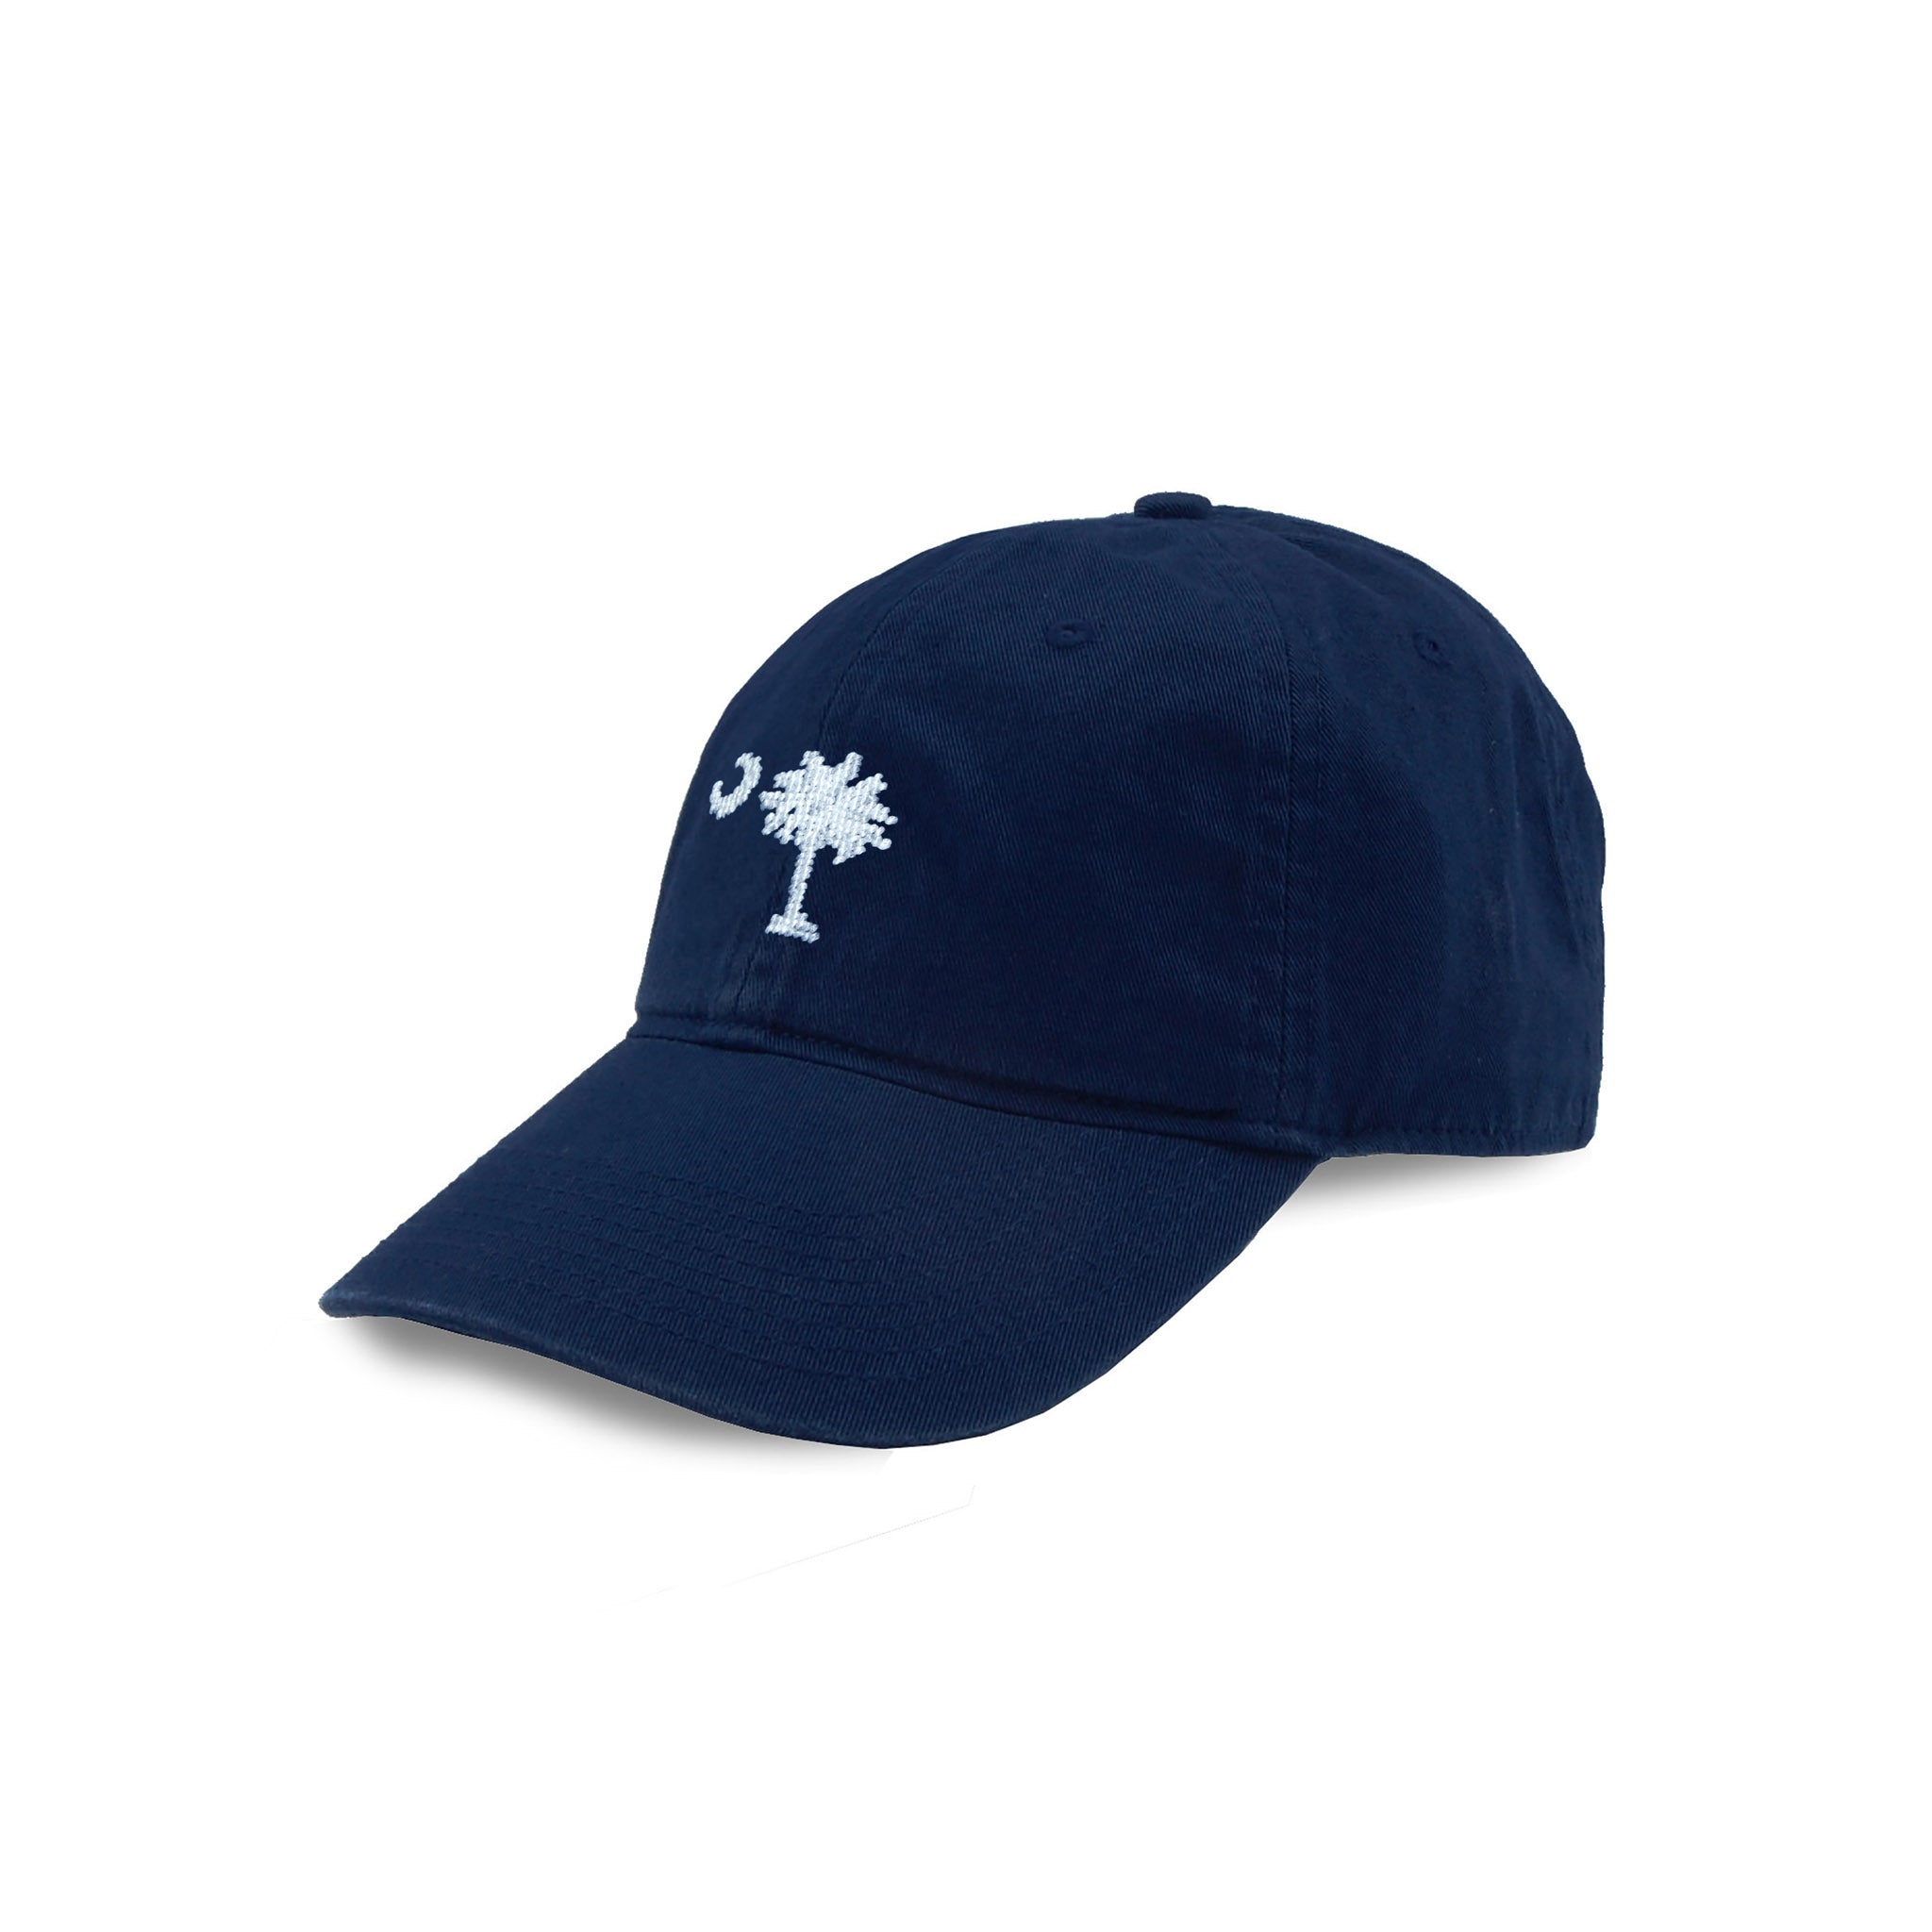 SC Flag Hat (Navy) at Smathers and Branson